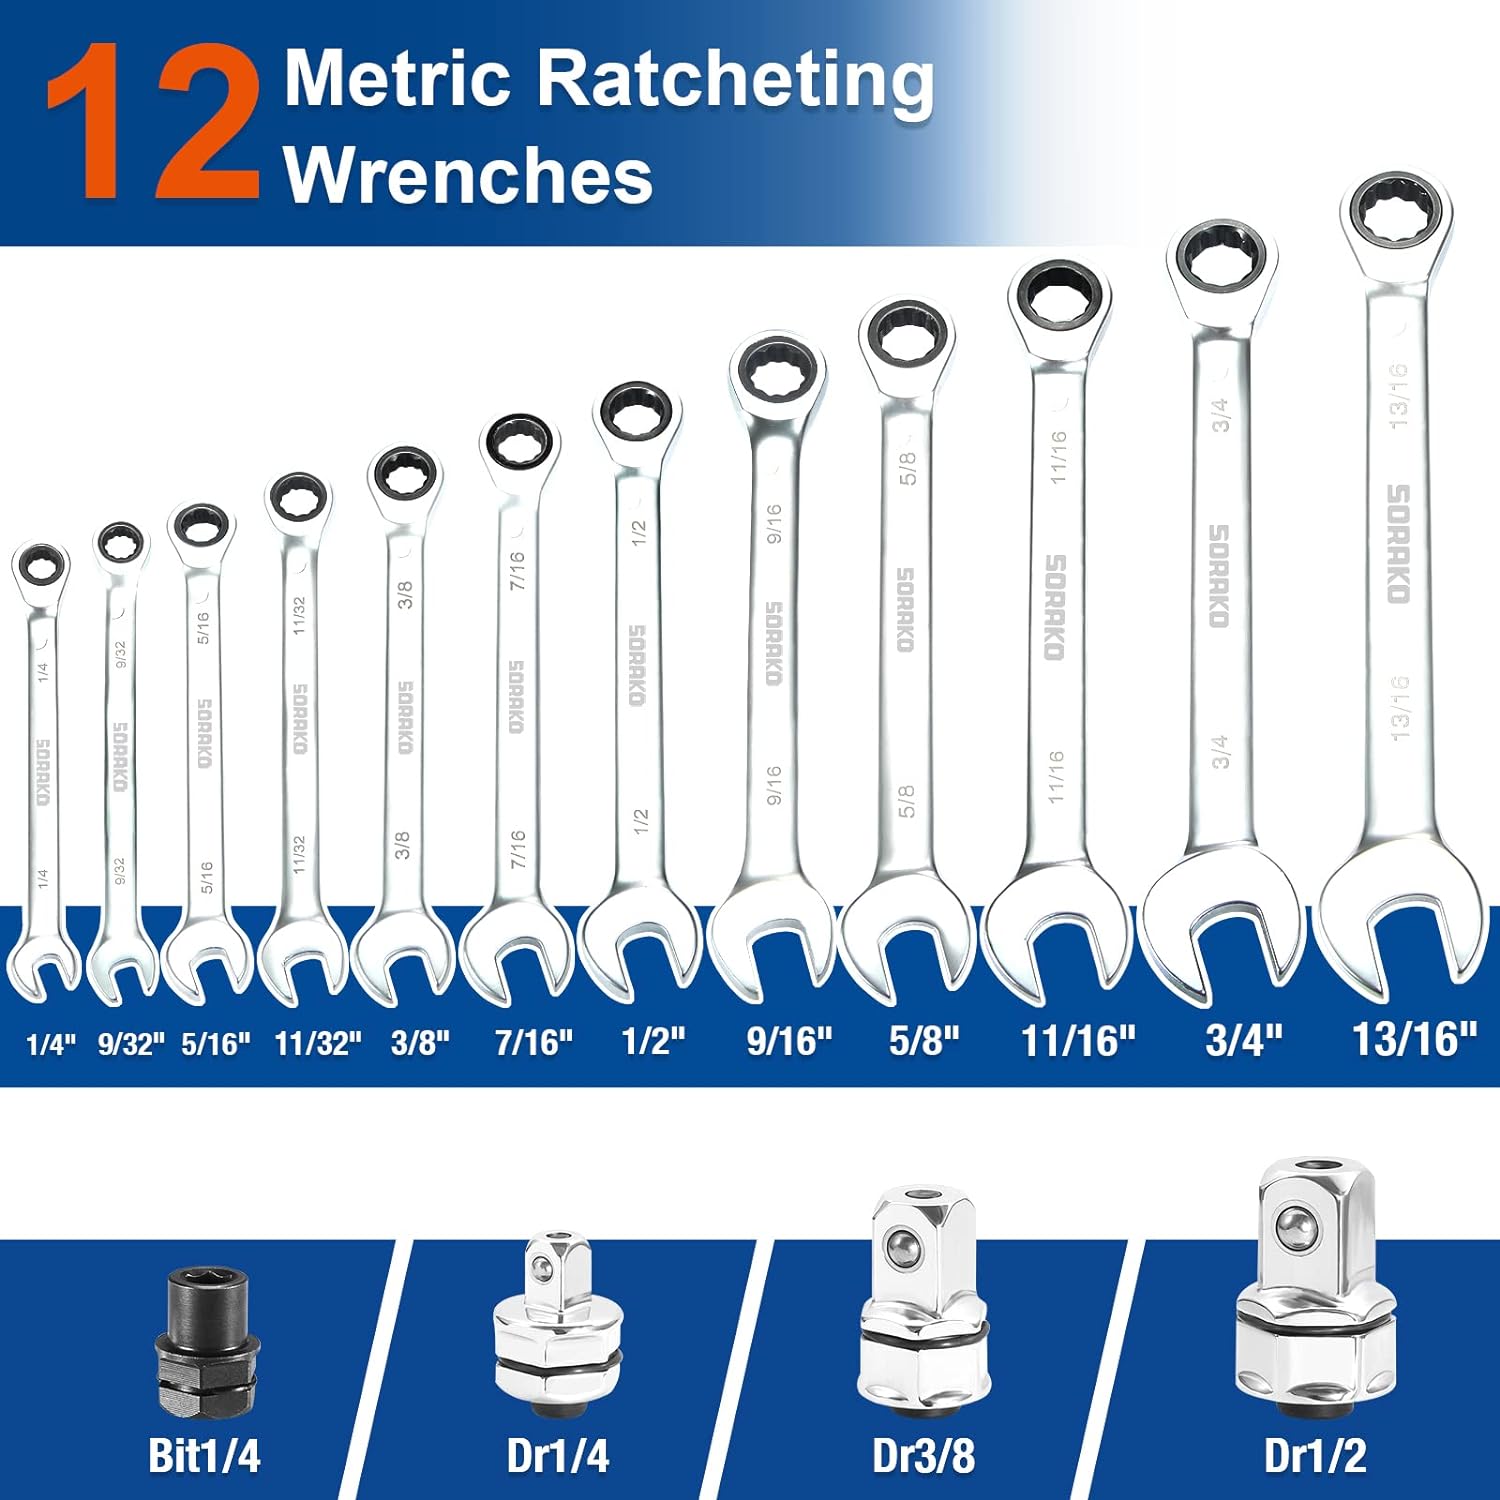 SORAKO Ratcheting Combination Wrench Set,16-Piece Ratchet Wrench Kit with Socket Adapter, 1/4″ - 13/16″ Chrome Vanadium Steel Wrenches